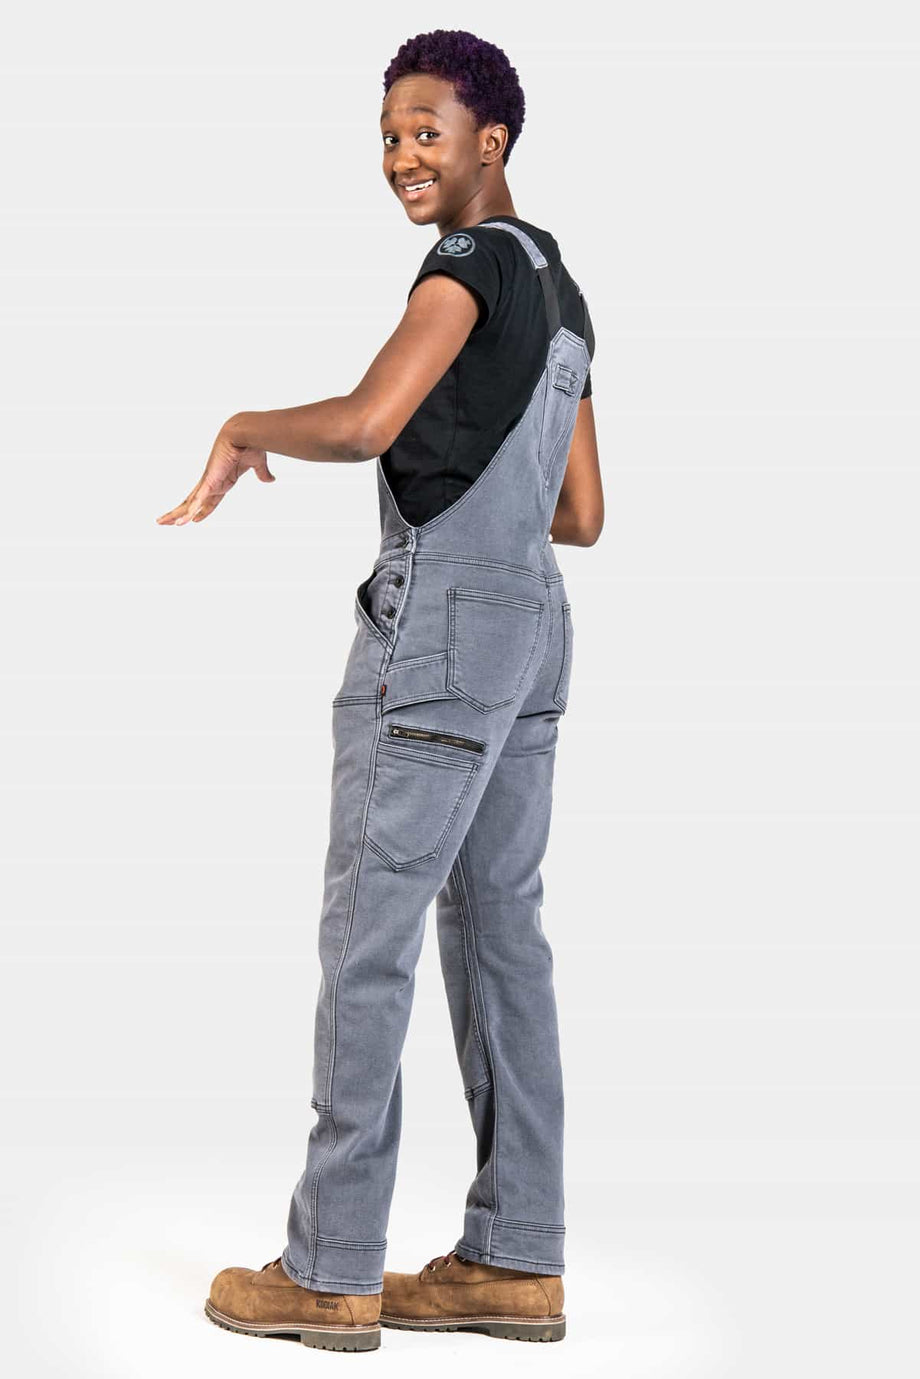 90s Denim Overalls  Dungarees Bib Sears Long Pants Workwear 1990s  Carpenter Suspender Jeans Coveralls Wide Leg BUTTON FLY Small  Overalls  fashion Overalls Denim overalls